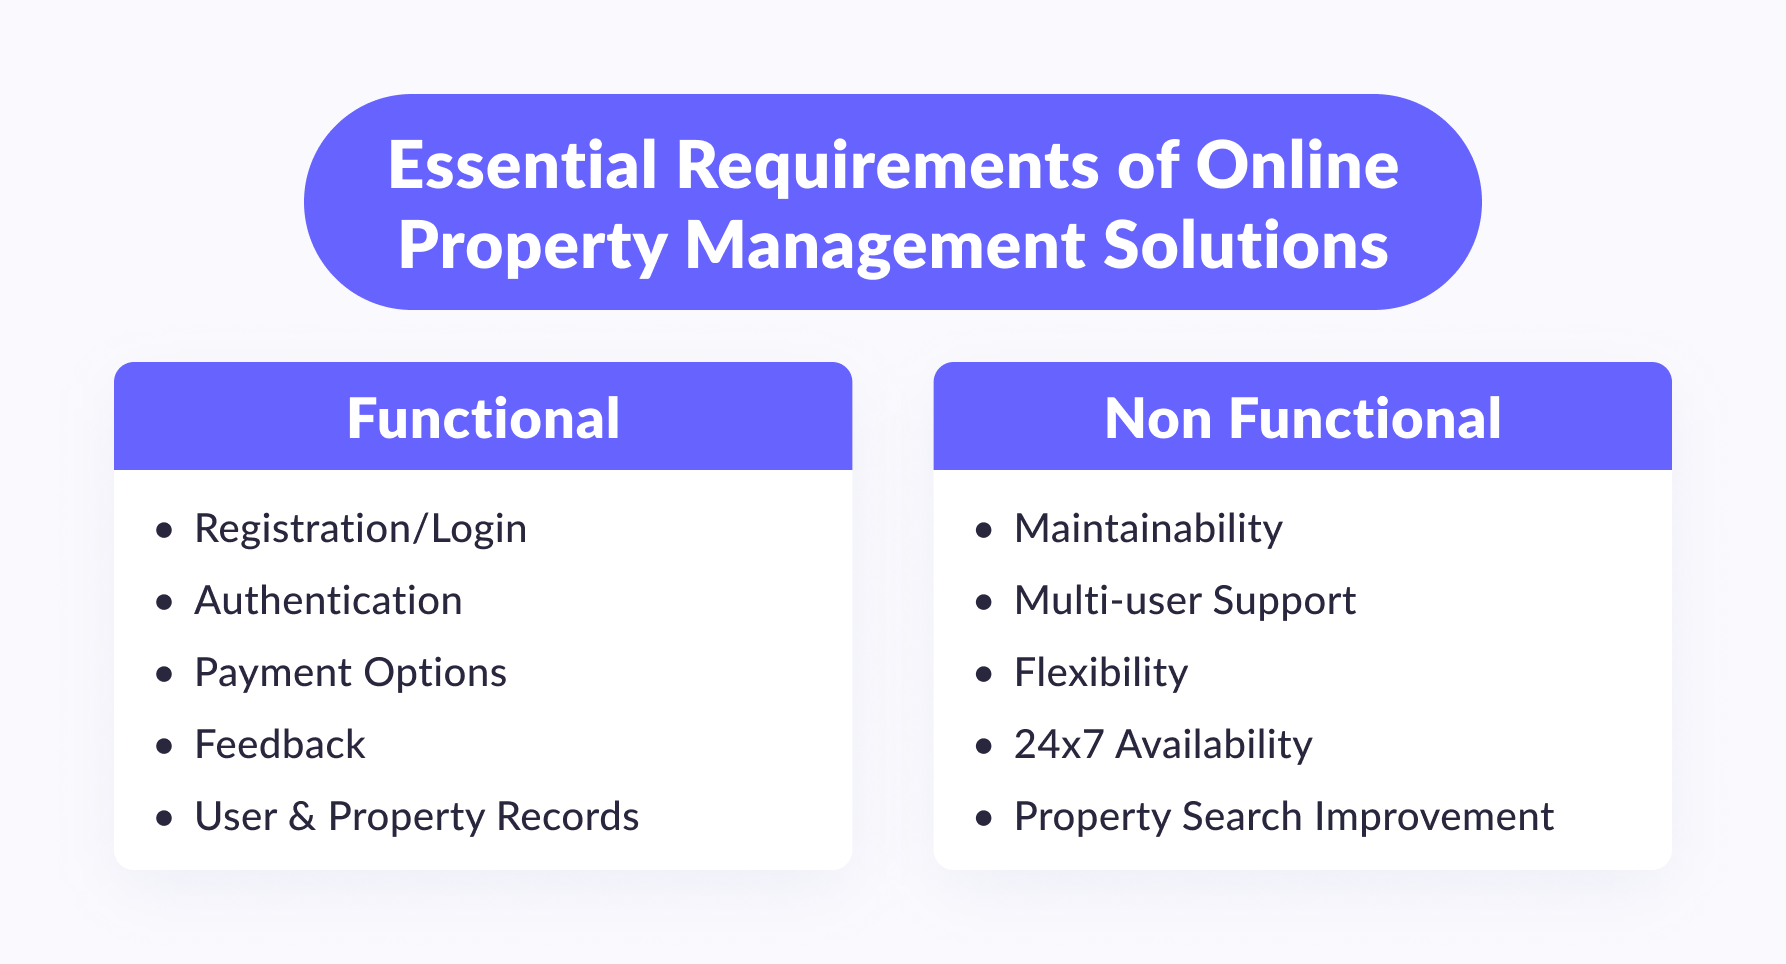 Essential requirements of online property management system